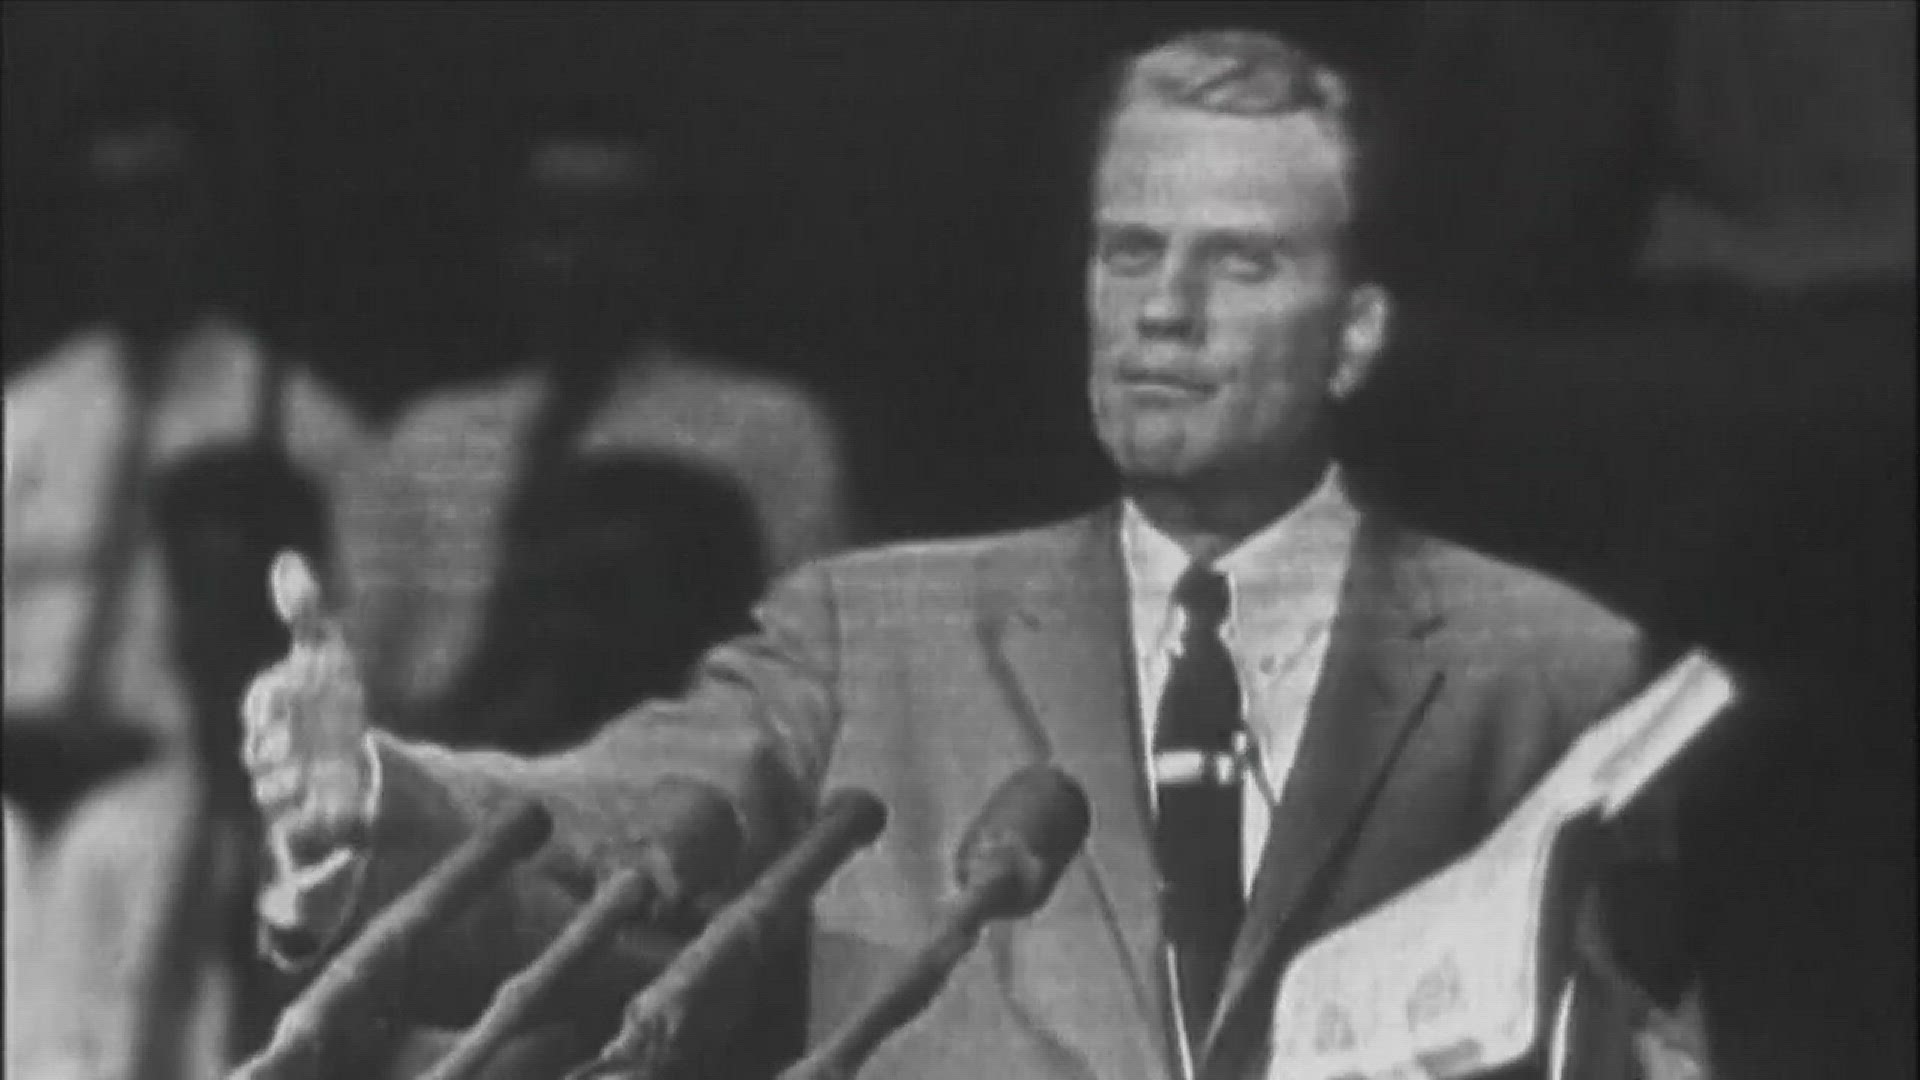 Reverend Billy Graham has died at the age of 99. Chris Clackum takes a look at his extraordinary life.